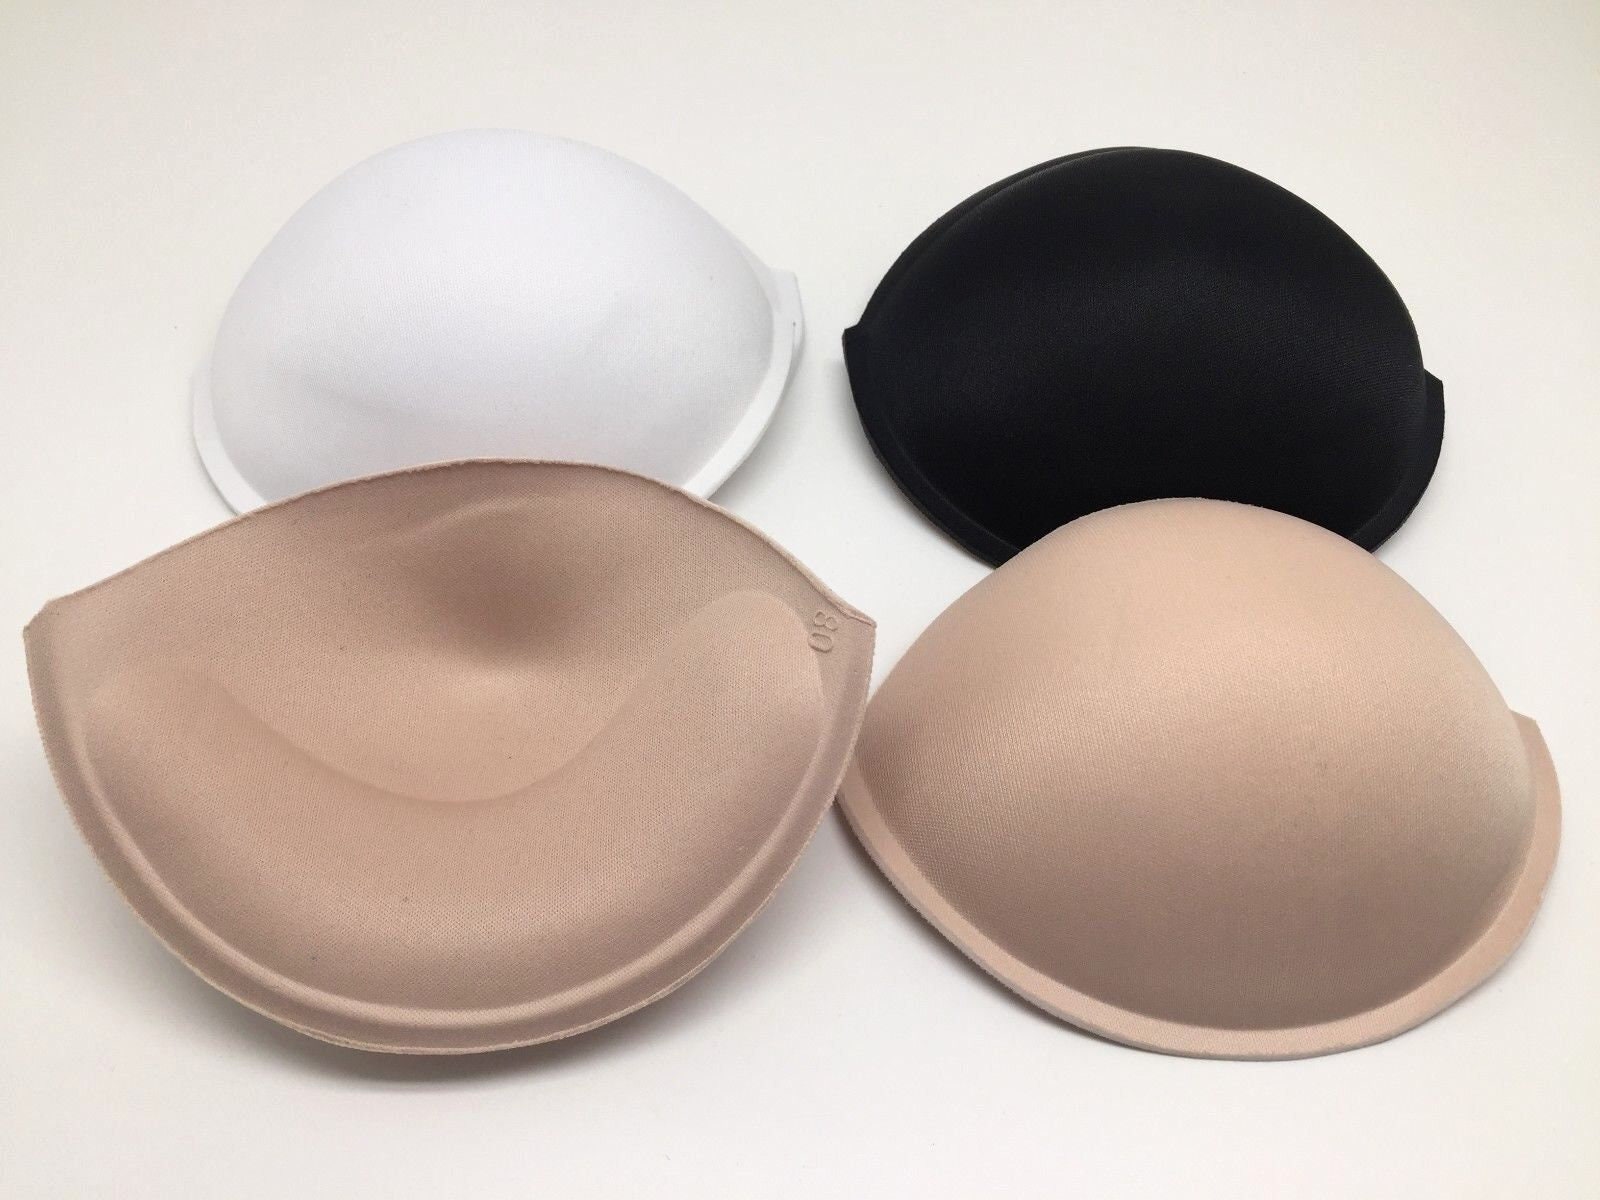 FOYTOKI 6 Pairs Bra Pad Bras Without Underwire White Bras Bra Cup Inserts  Bra Cups for Sewing Bra Inserts Pads Push up Bra Inserts Pads Pushup  Underwear Chest Pad at  Women's